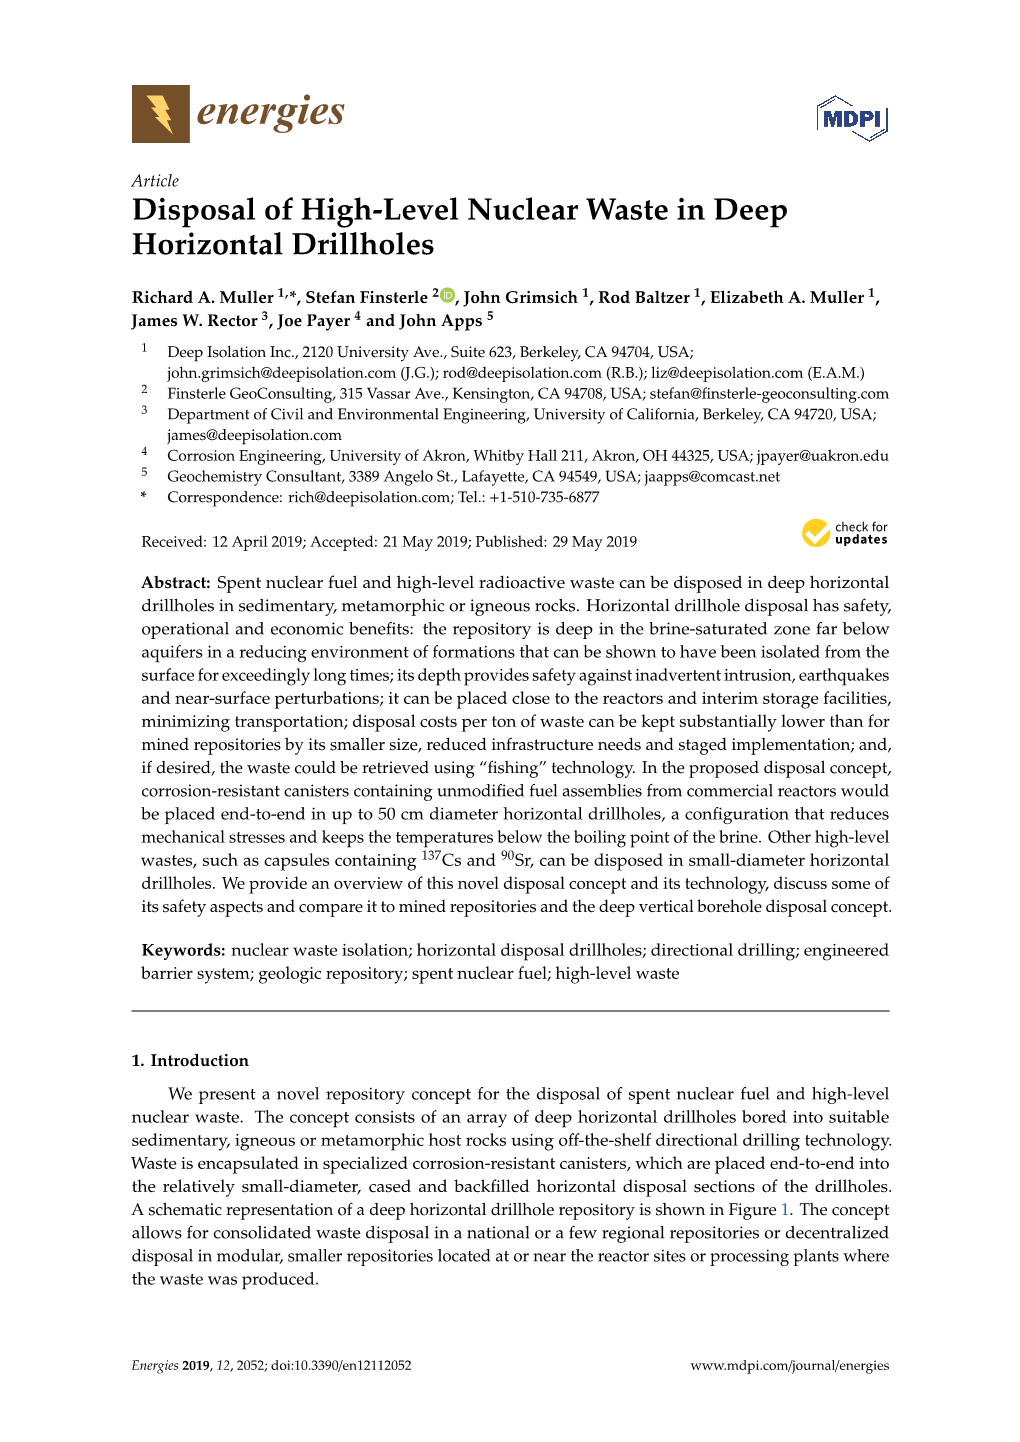 Disposal of High-Level Nuclear Waste in Deep Horizontal Drillholes